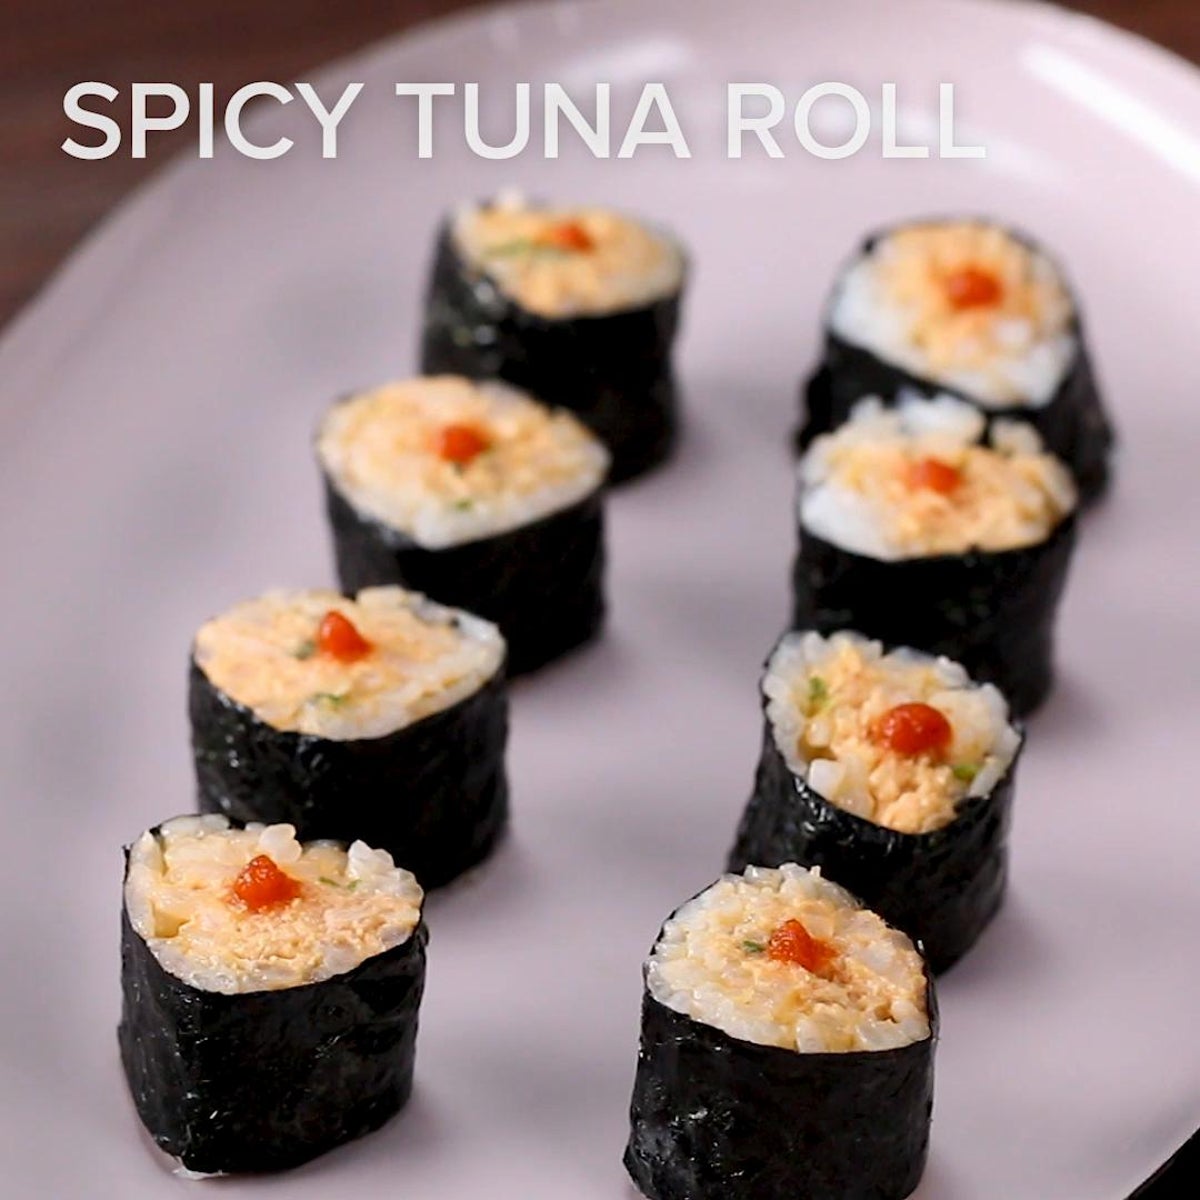 Spicy Salmon Sushi Roll-Ups